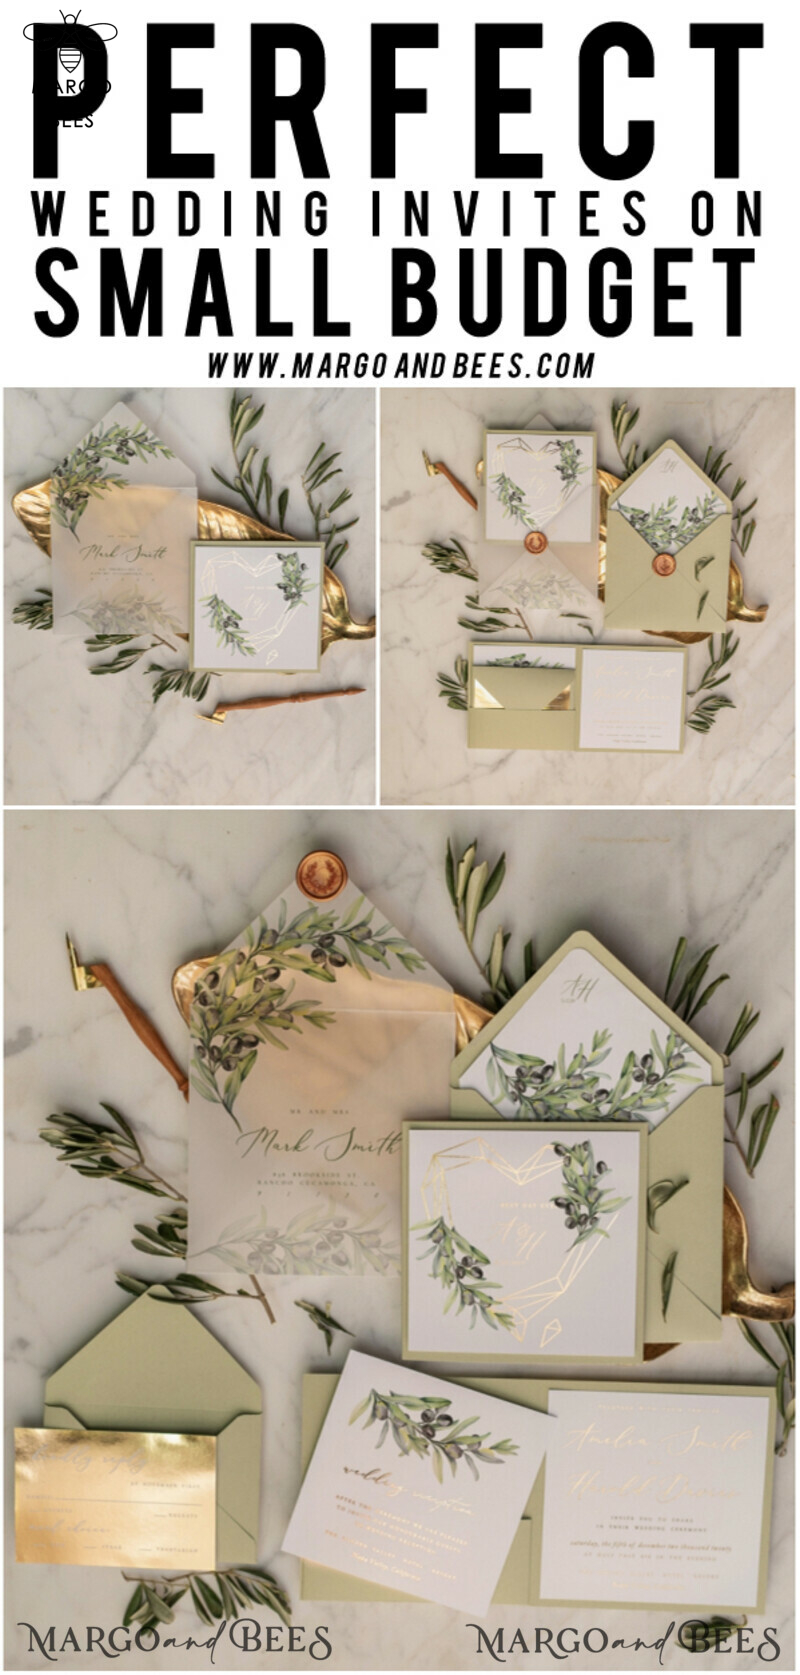 Create a Stunning Wedding with Elegant Olive Invitations, Luxury Sage Green Invites, and Glamourous Golden Pocketfold Cards from our Bespoke Tuscany Wedding Invitation Suite-11